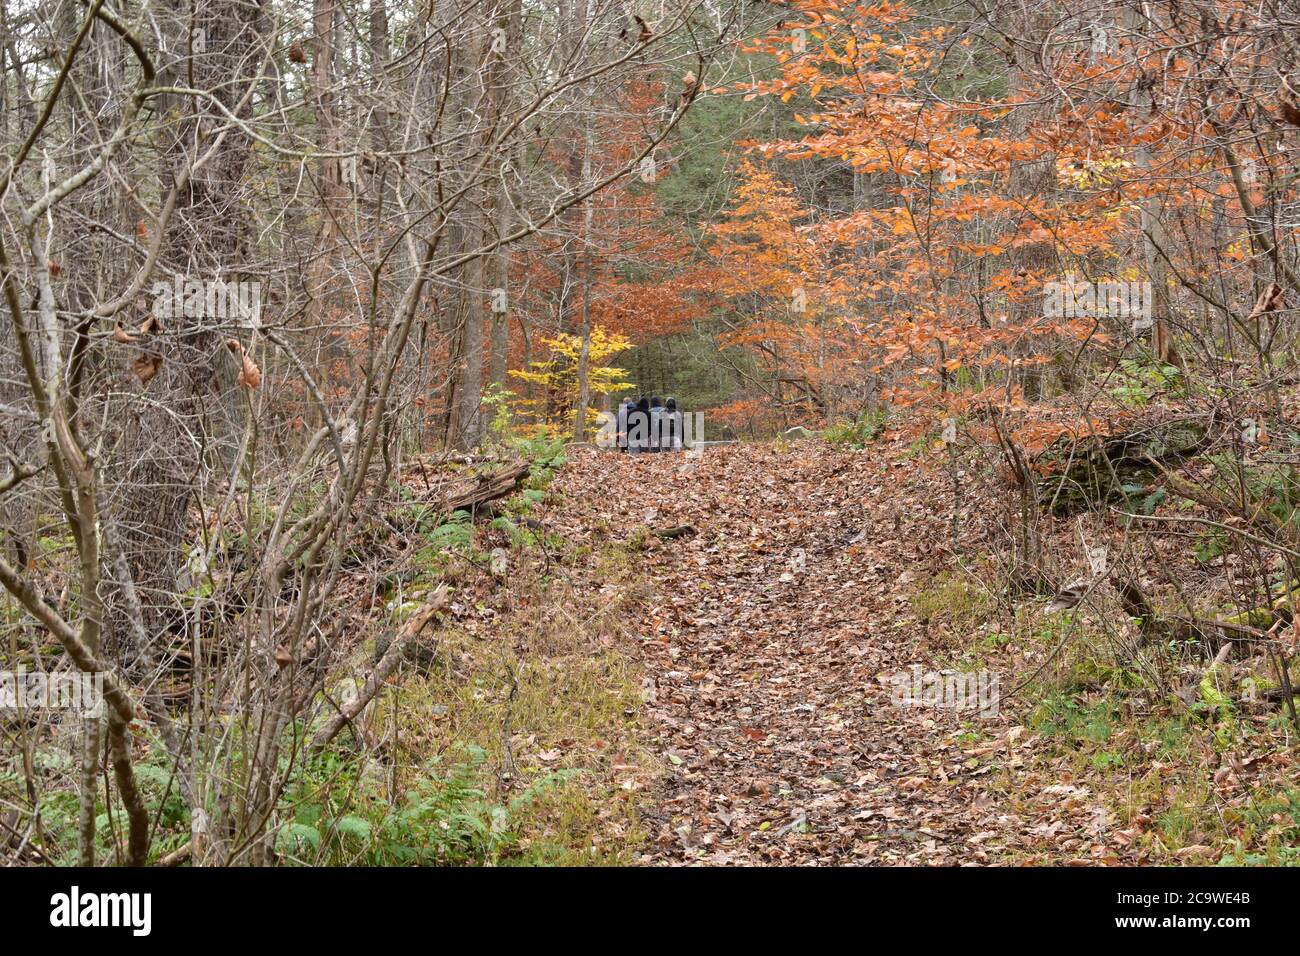 A Group of Men Far Off and Barely Visible in the Distance in an Autumn Forest Stock Photo